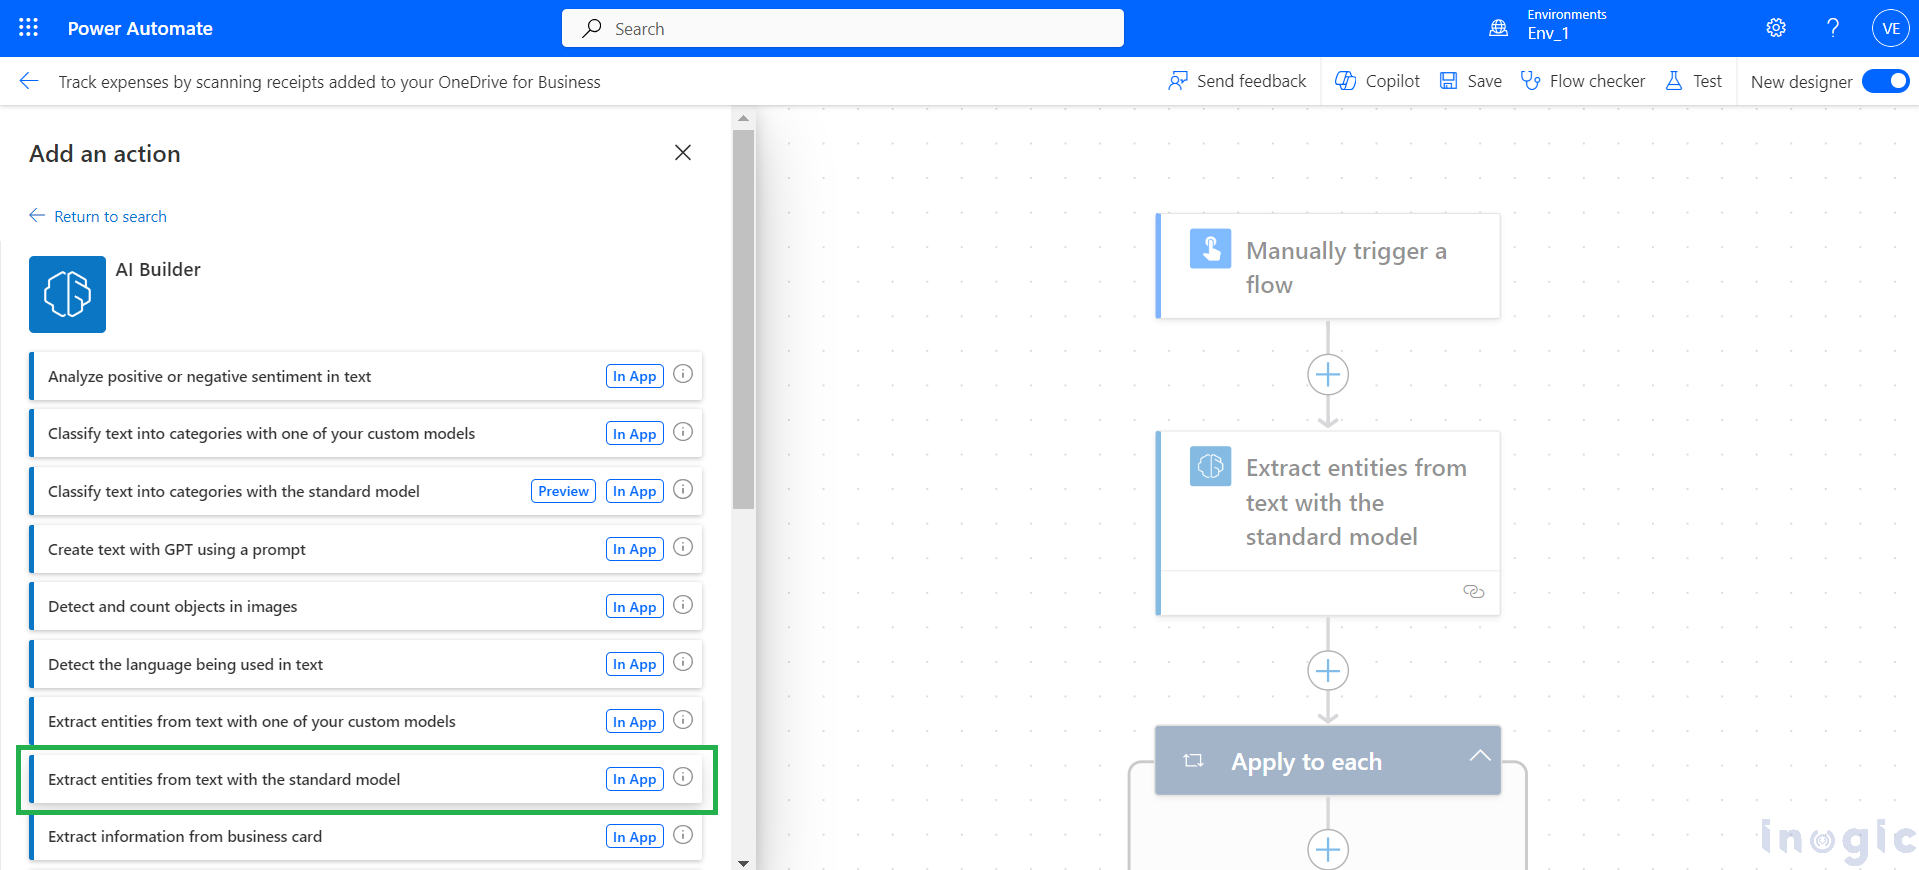 Streamlined Text and Document Categorization in Power Automate